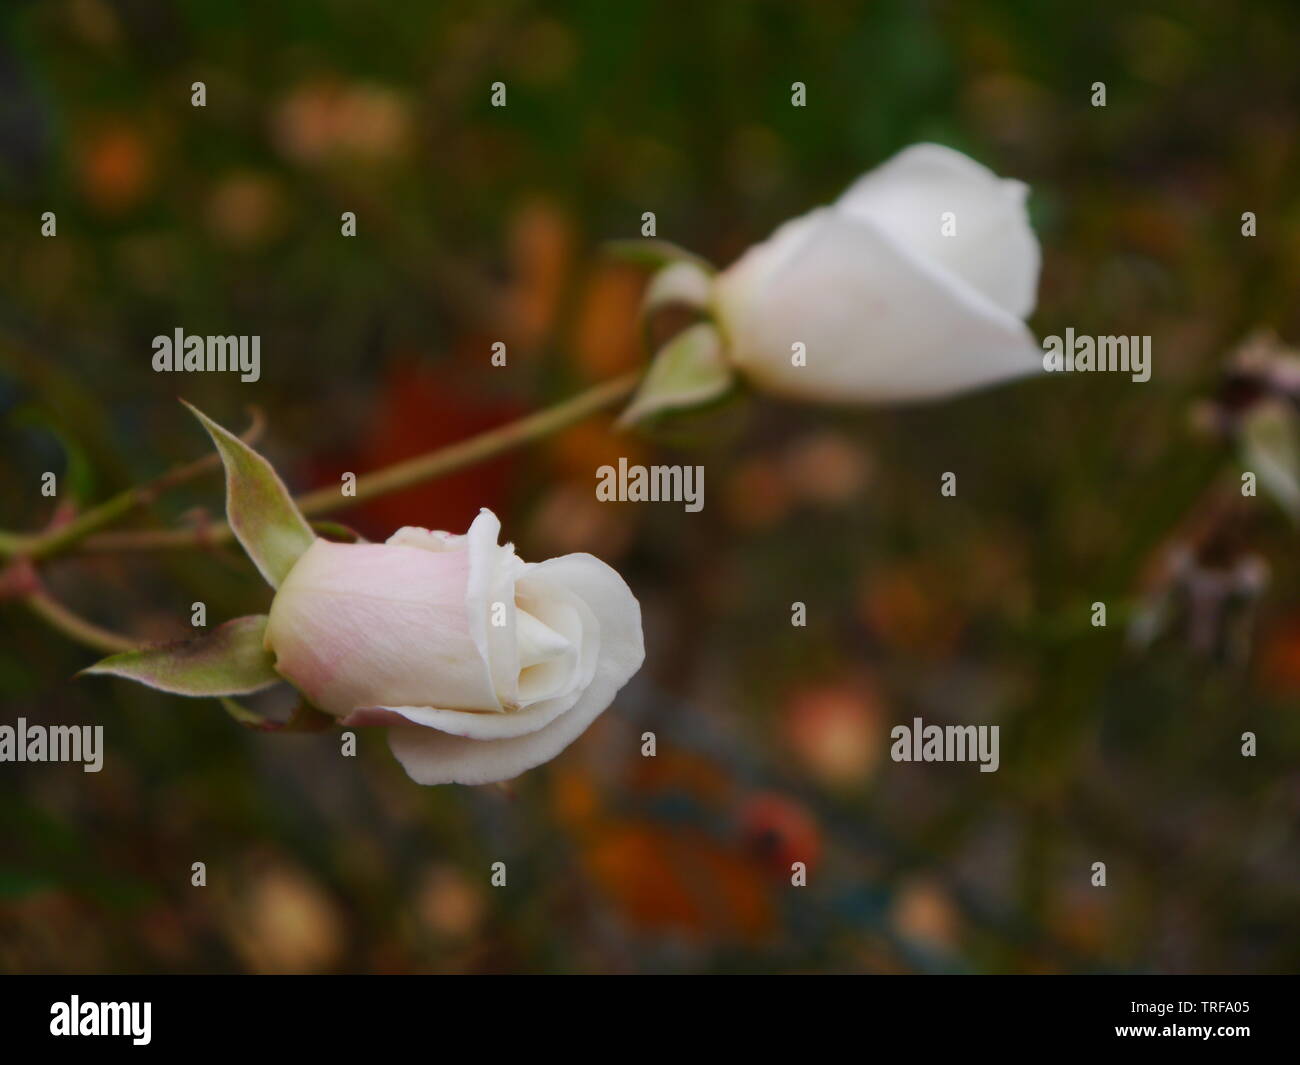 A close up shot of two beautiful white roses with a blurry background. Stock Photo